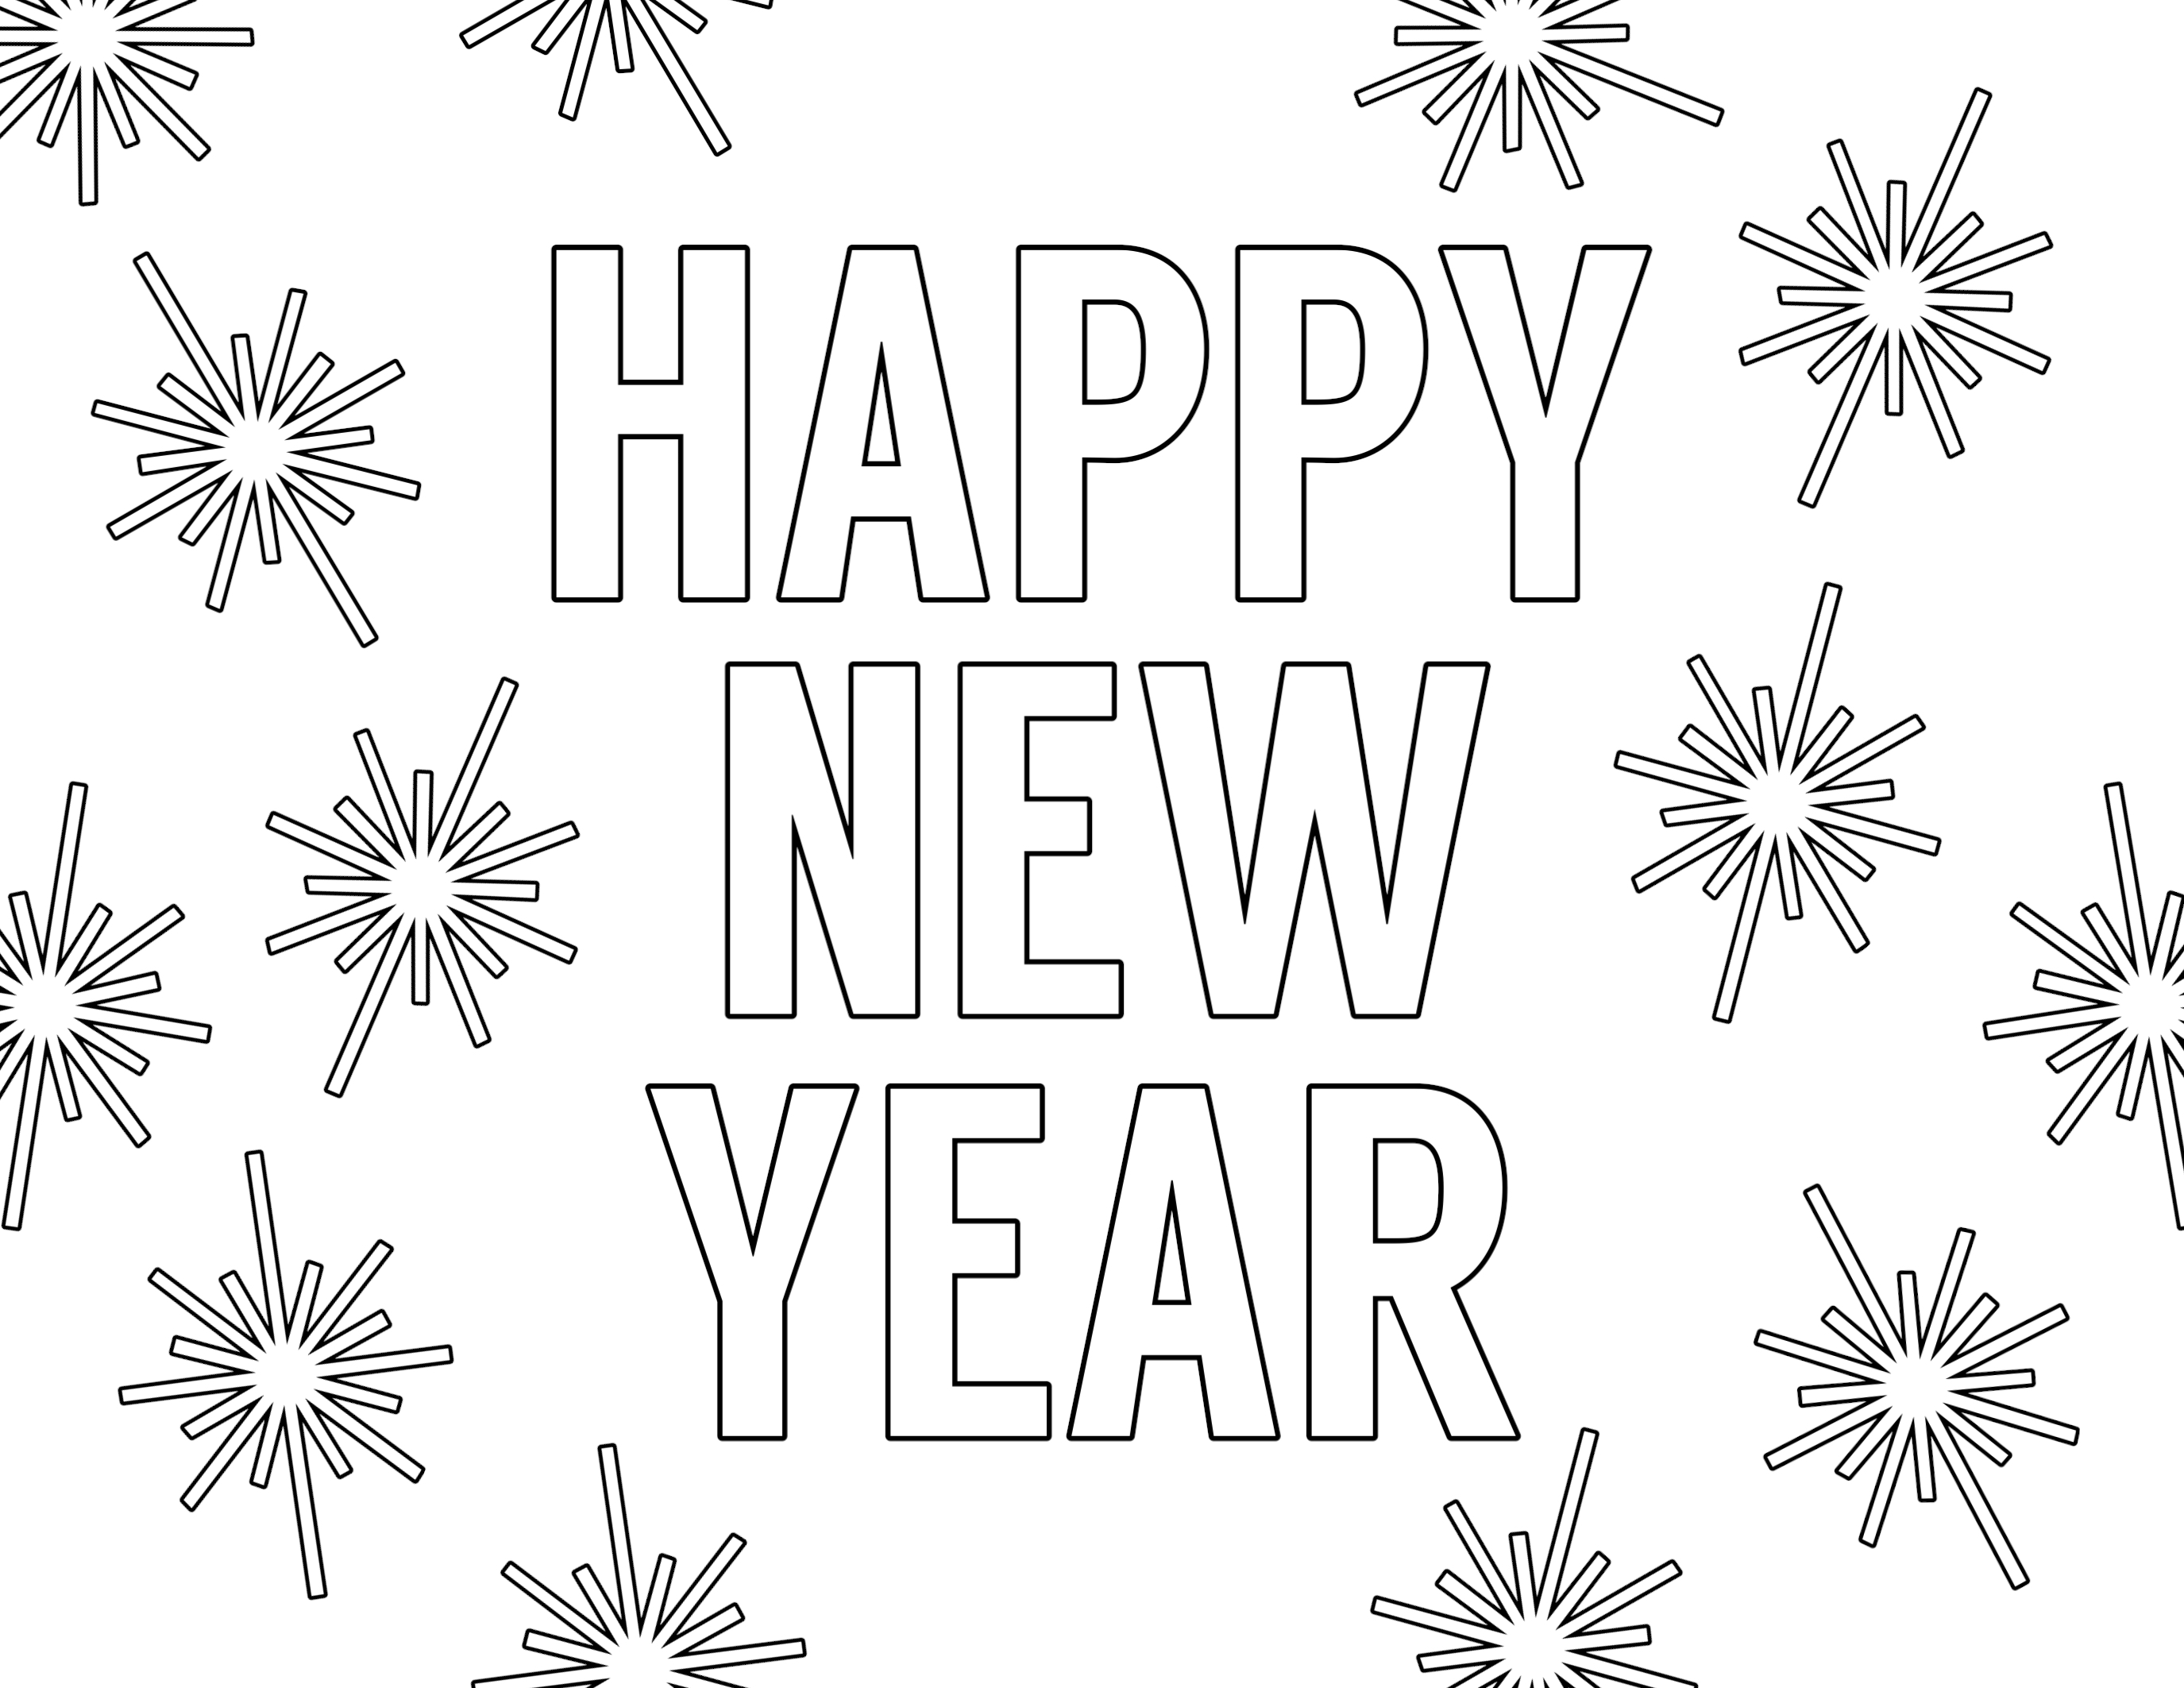 Happy New Year Coloring Pages Free Printable   Paper Trail Design